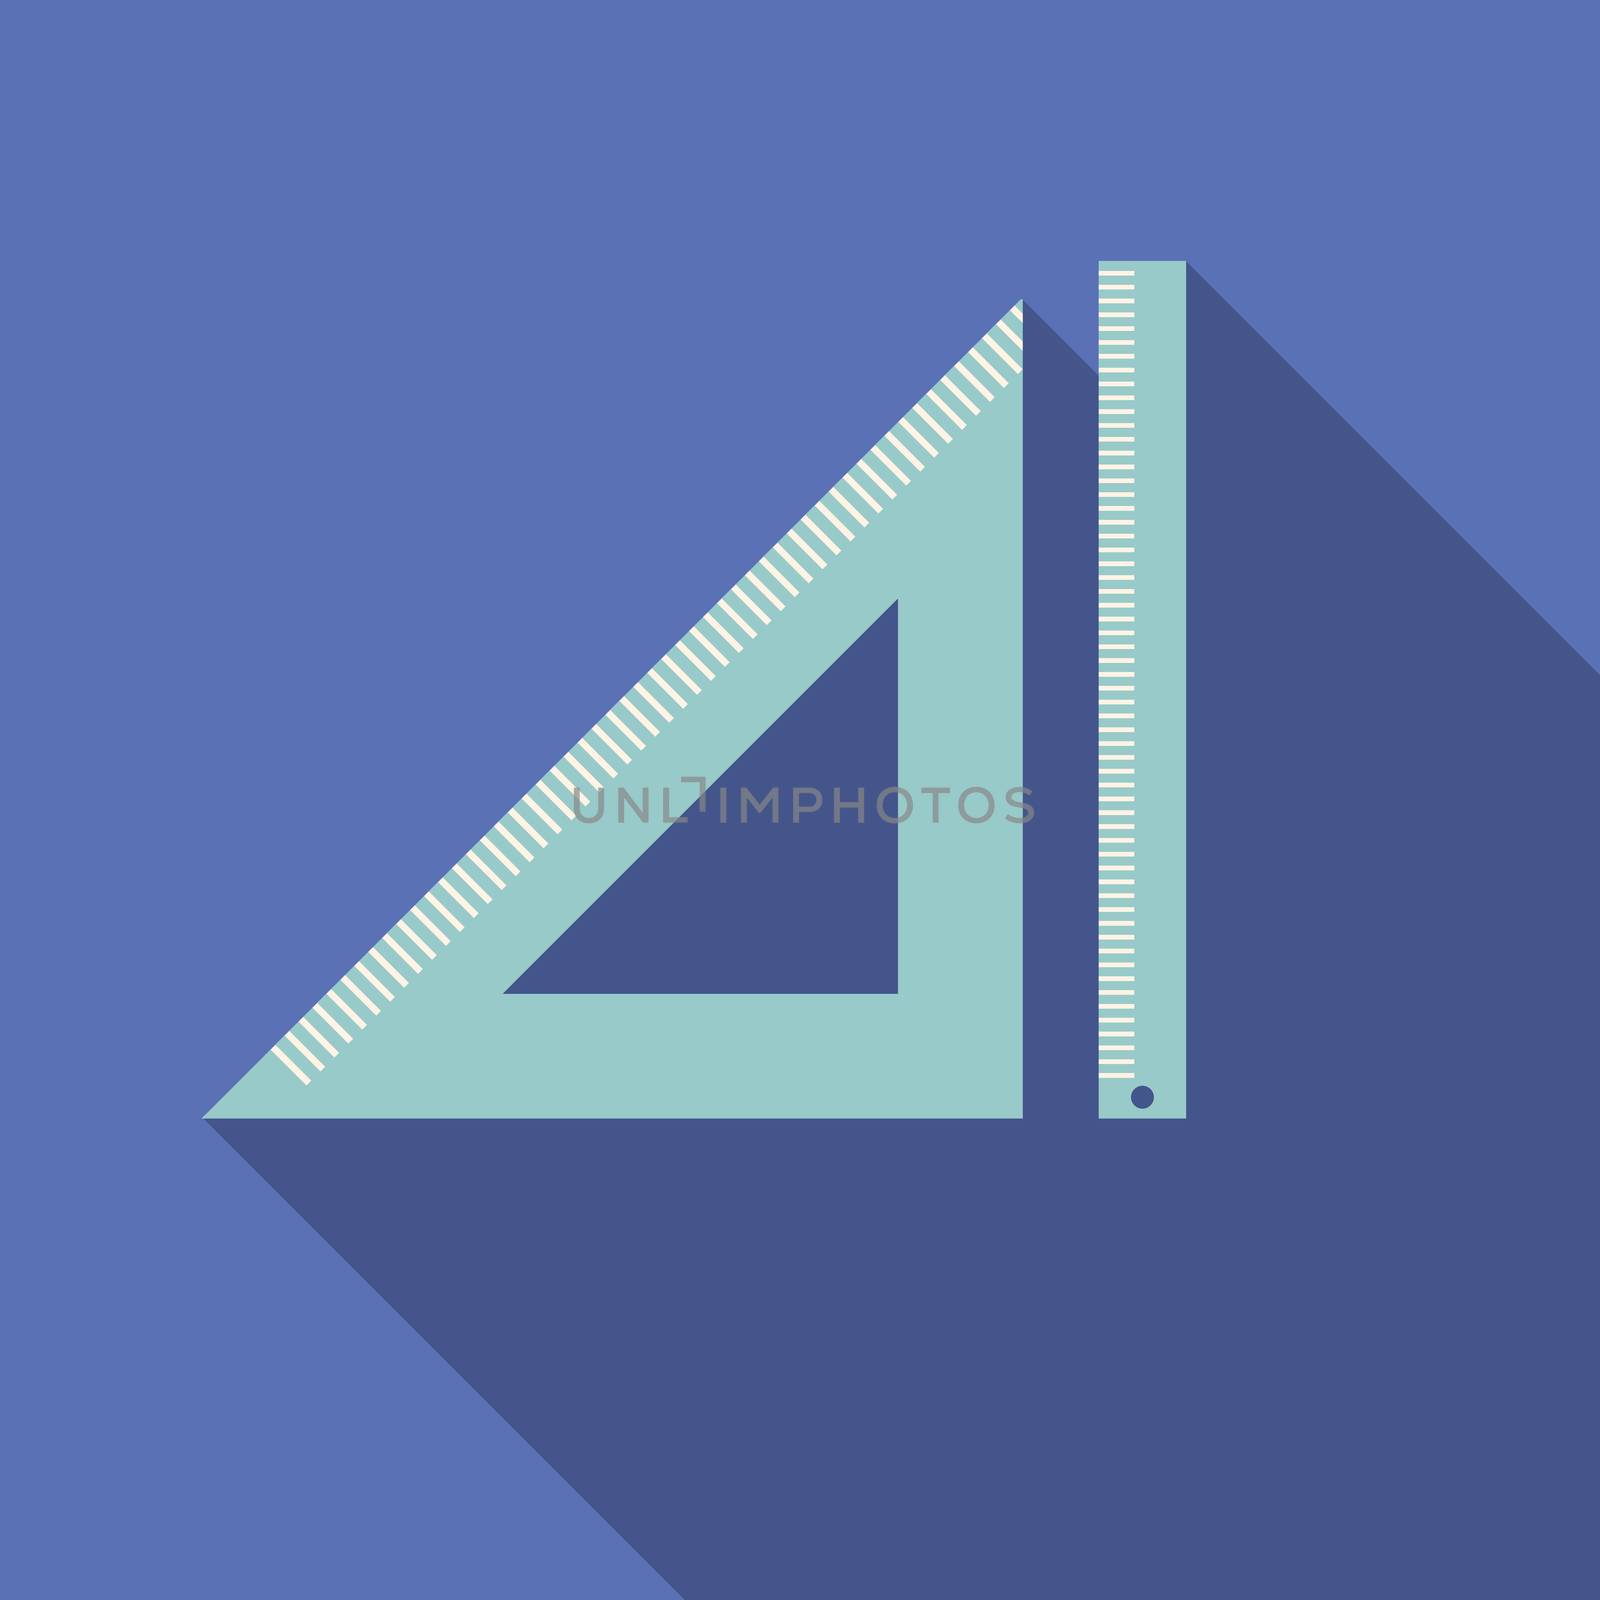 Flat design modern vector illustration of triangle and straightedge icon with long shadow.